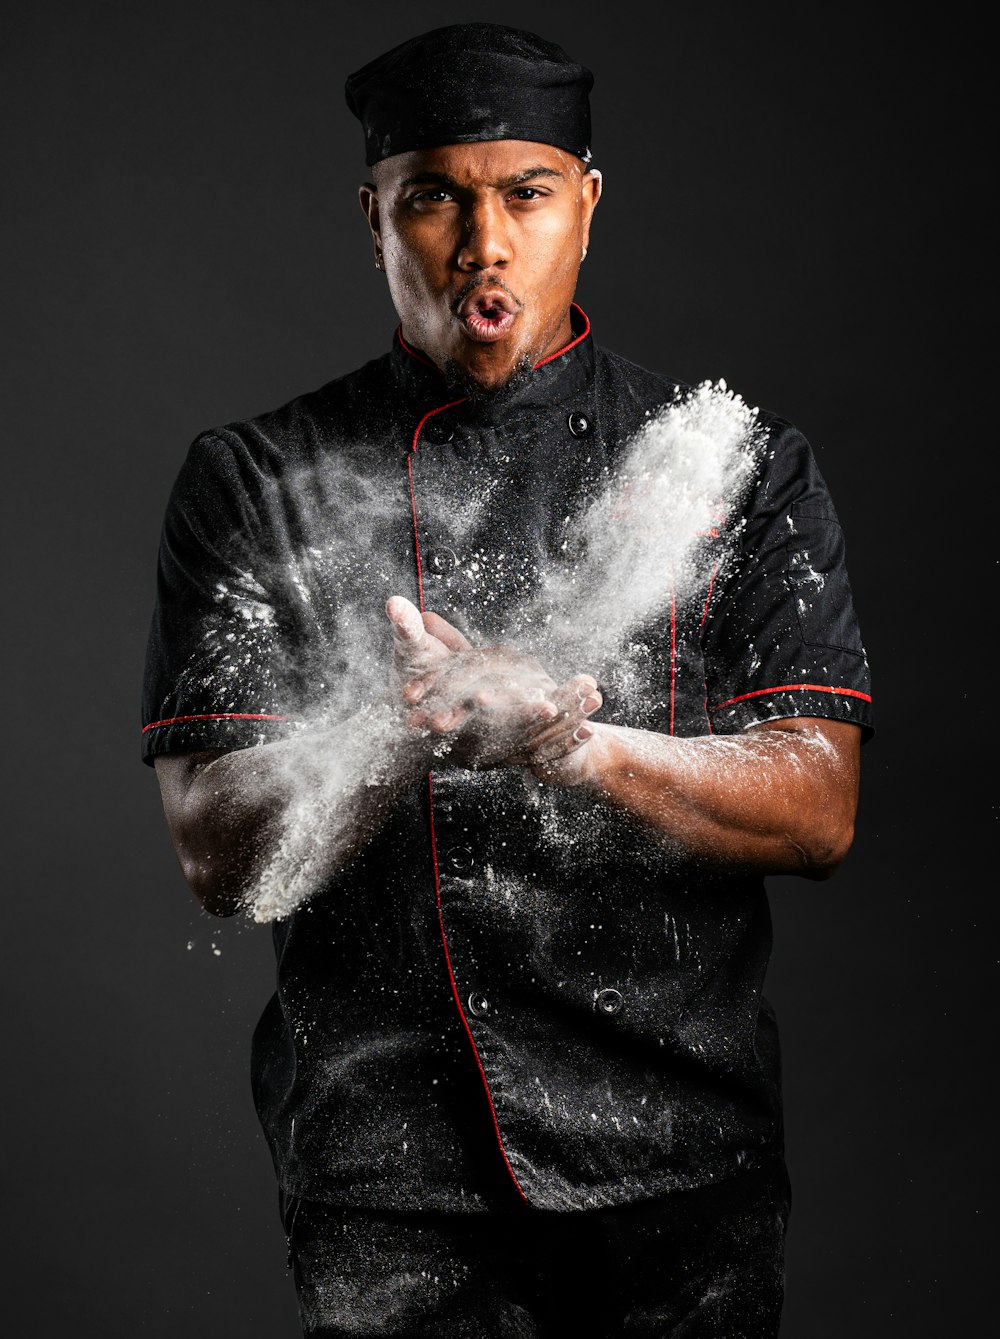 a man in a chef's uniform is sprinkled with flour